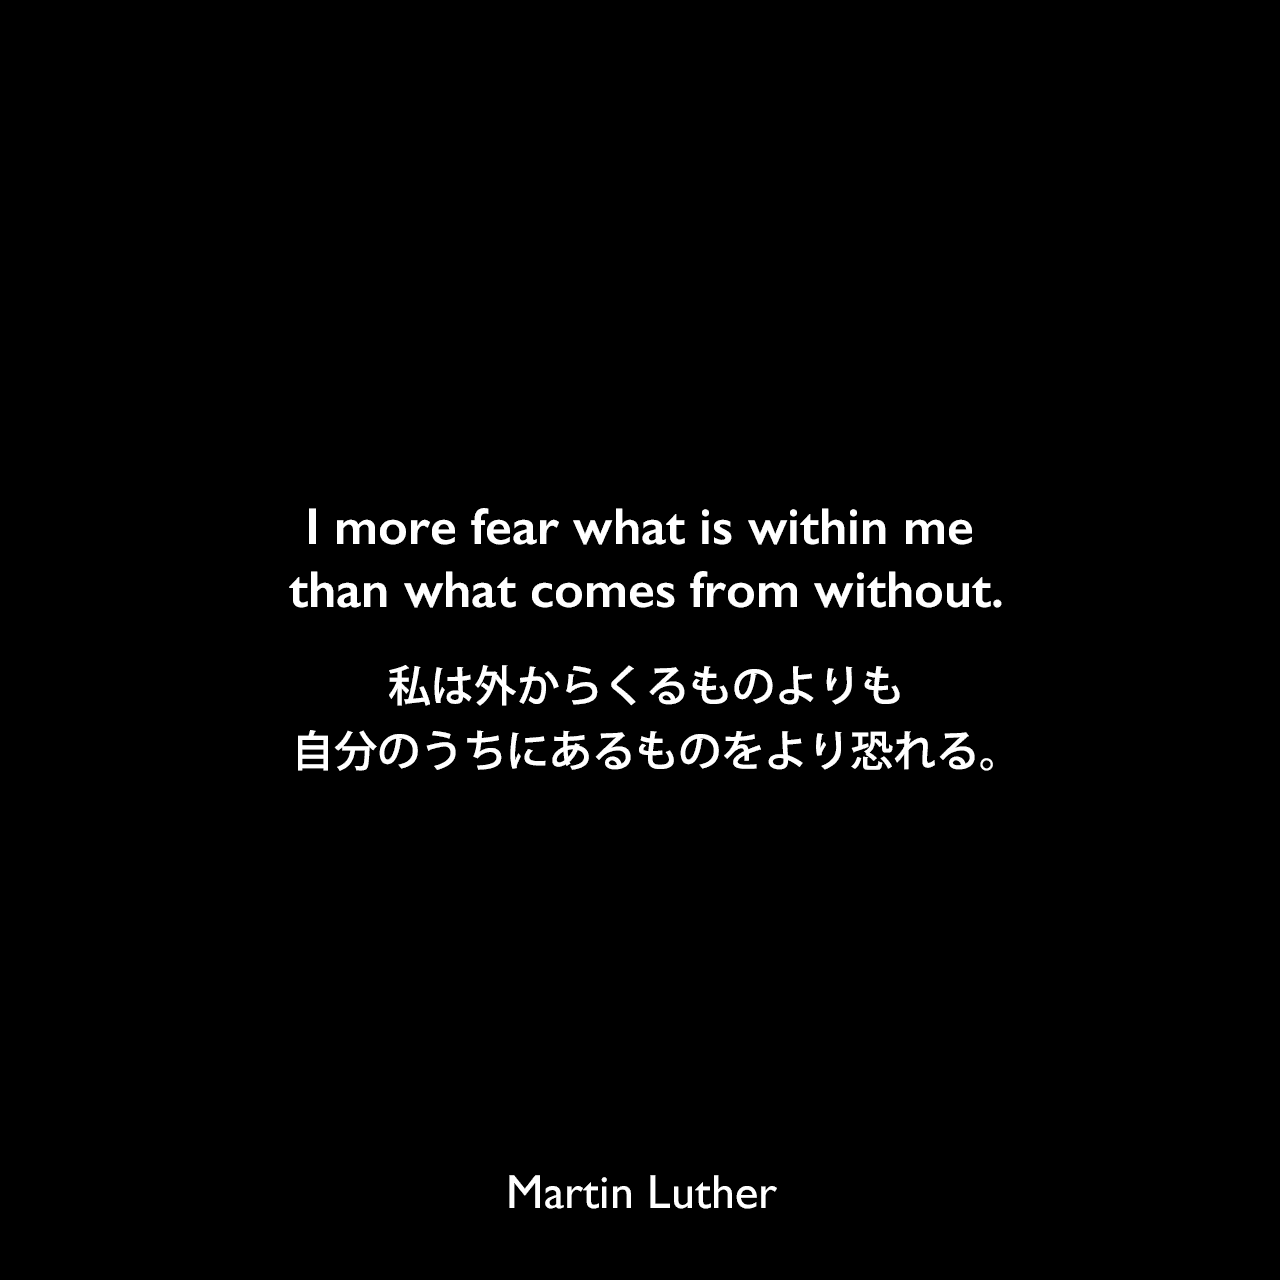 I more fear what is within me than what comes from without.私は外からくるものよりも自分のうちにあるものをより恐れる。Martin Luther